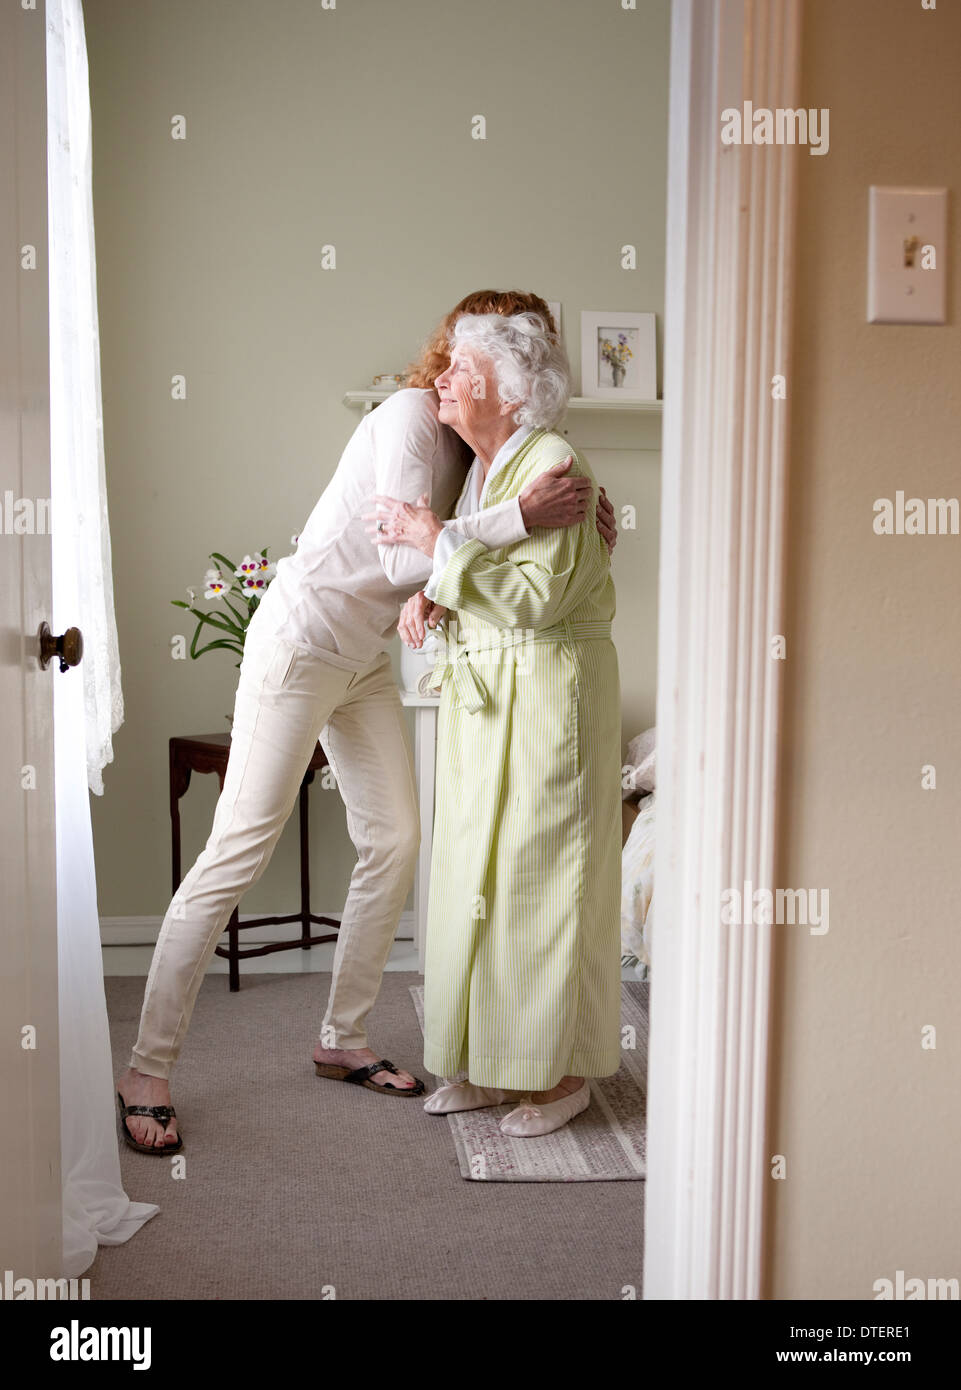 Female caregiver embracing elderly woman in bedroom Stock Photo